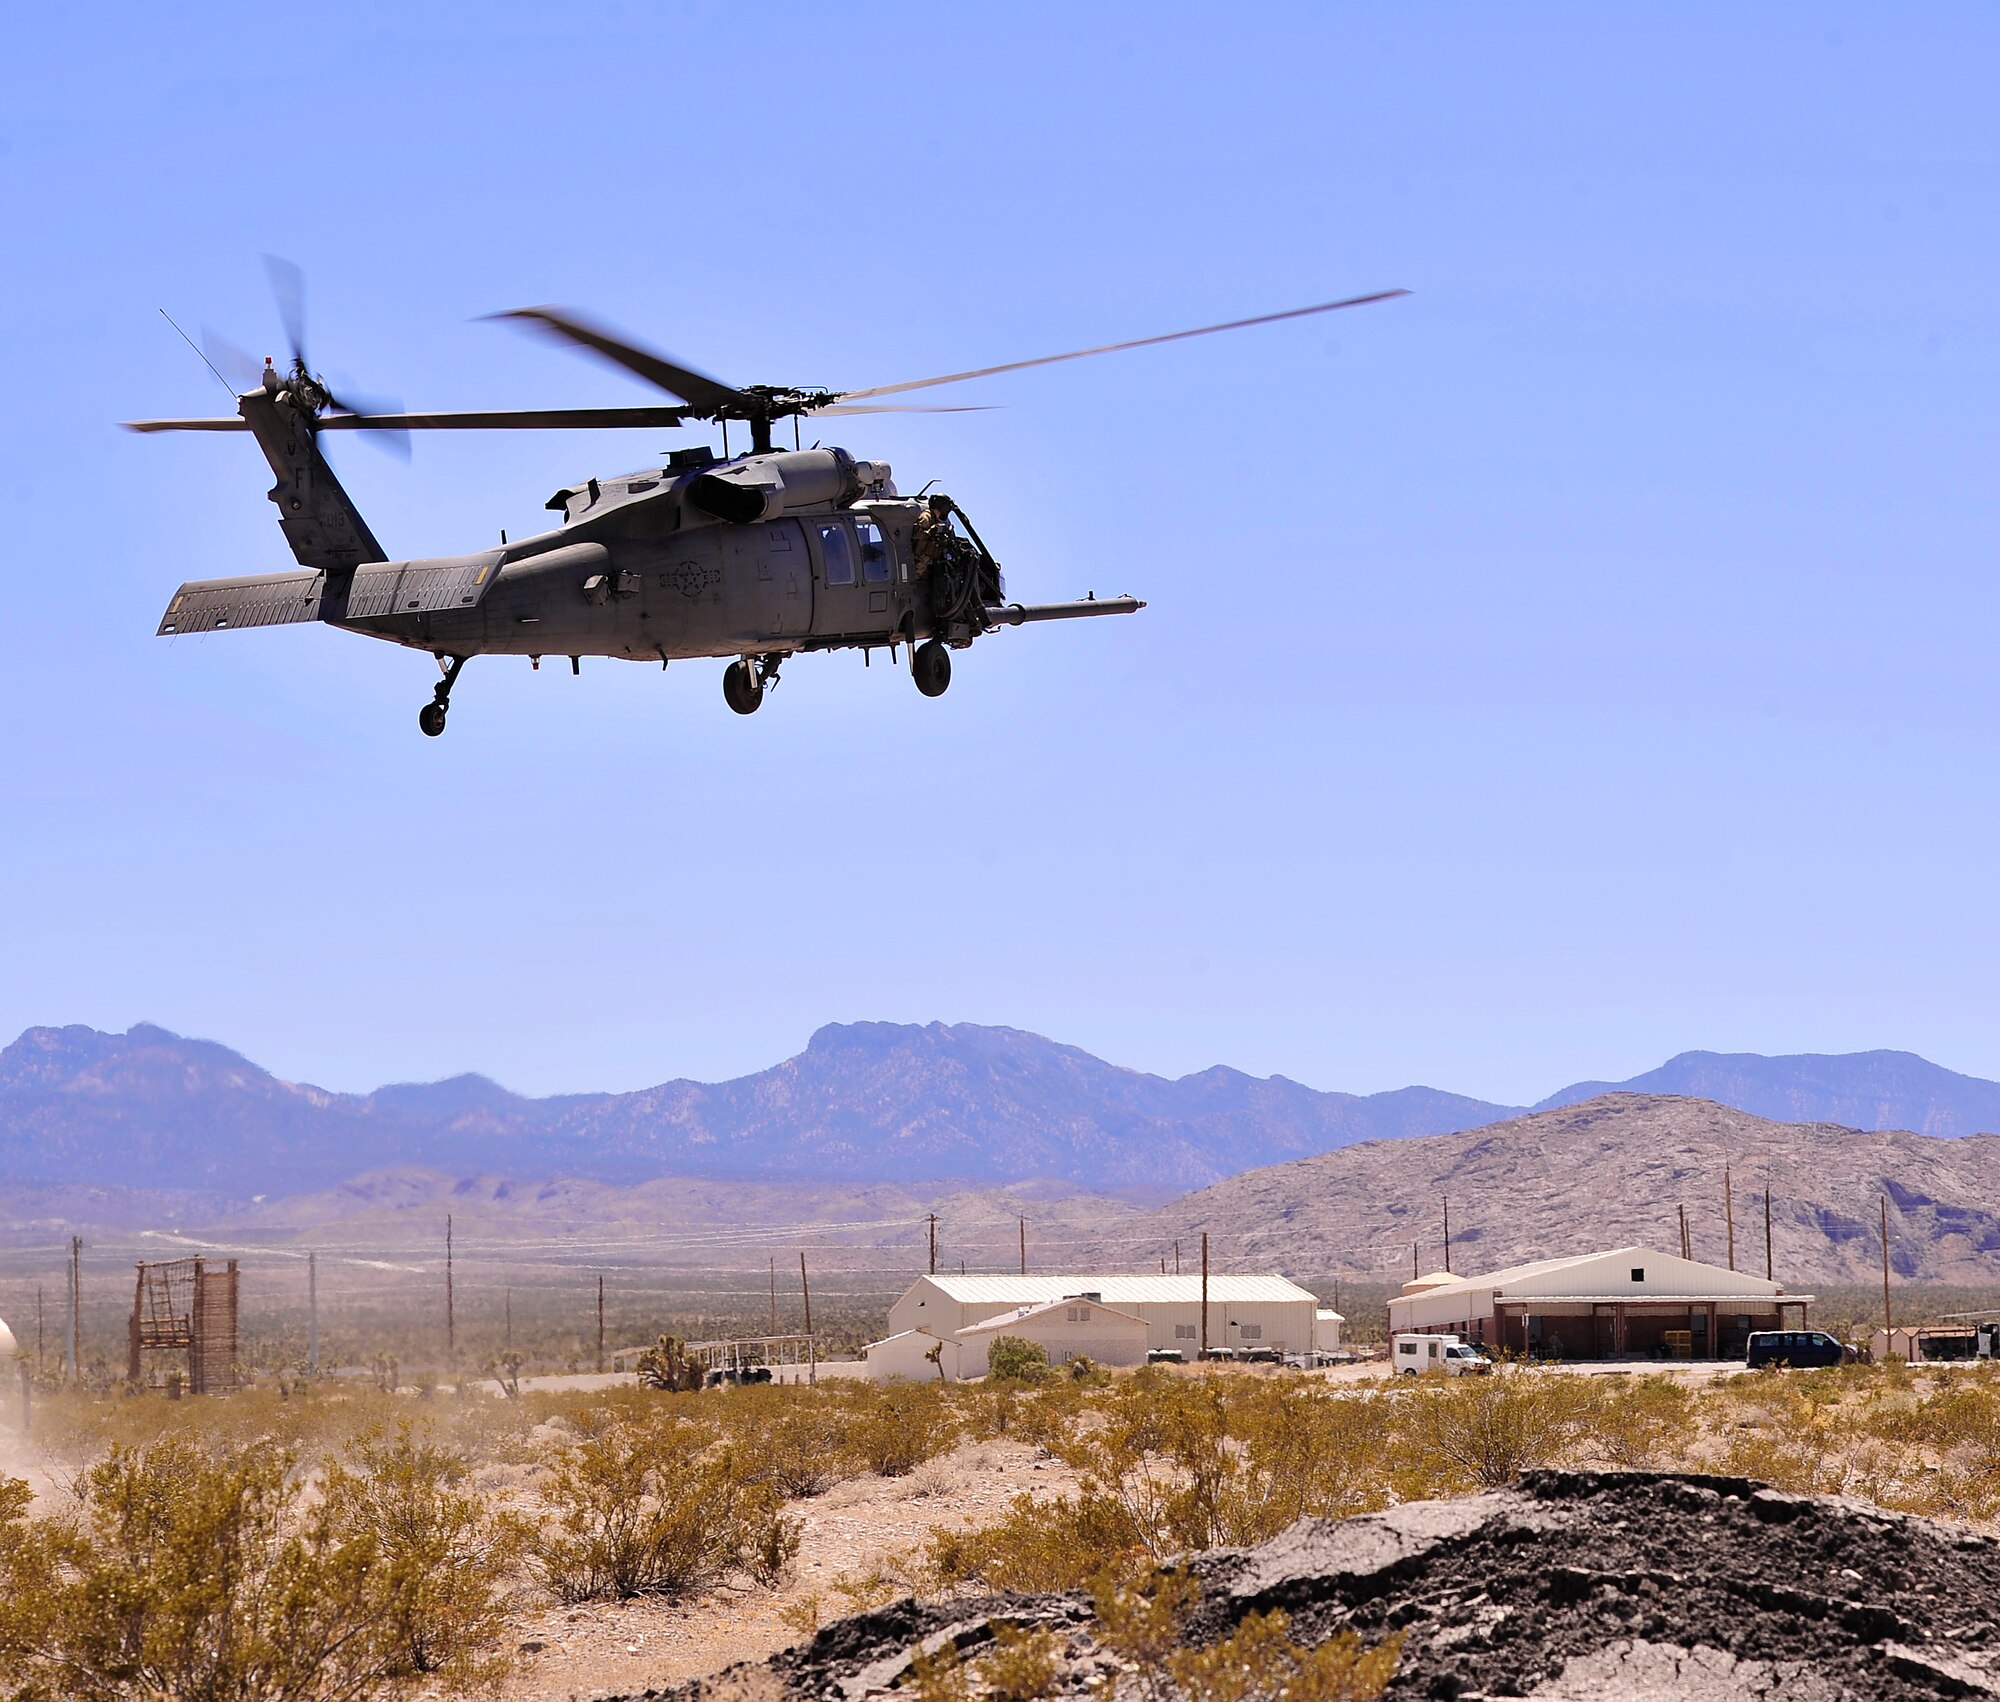 NEVADA TEST AND TRAINING RANGE, Nev. --  An HH-60 Pave Hawk helicopter from the 66th Rescue Squadron at Nellis Air Force Base, carrying security forces members and military working dogs assigned to the 99th Ground Combat Training Squadron prepares to land at a ground combat training range outside of Las Vegas June 14, 2013. The Pave Hawk is a highly modified version of the Army Black Hawk helicopter which features an upgraded communications and navigation suite that enables rescue personnel the ability to conduct day or night personnel recovery operations into hostile environments to recover isolated personnel during war.  (U.S. Air Force photo by Staff Sgt. D.H./Released)